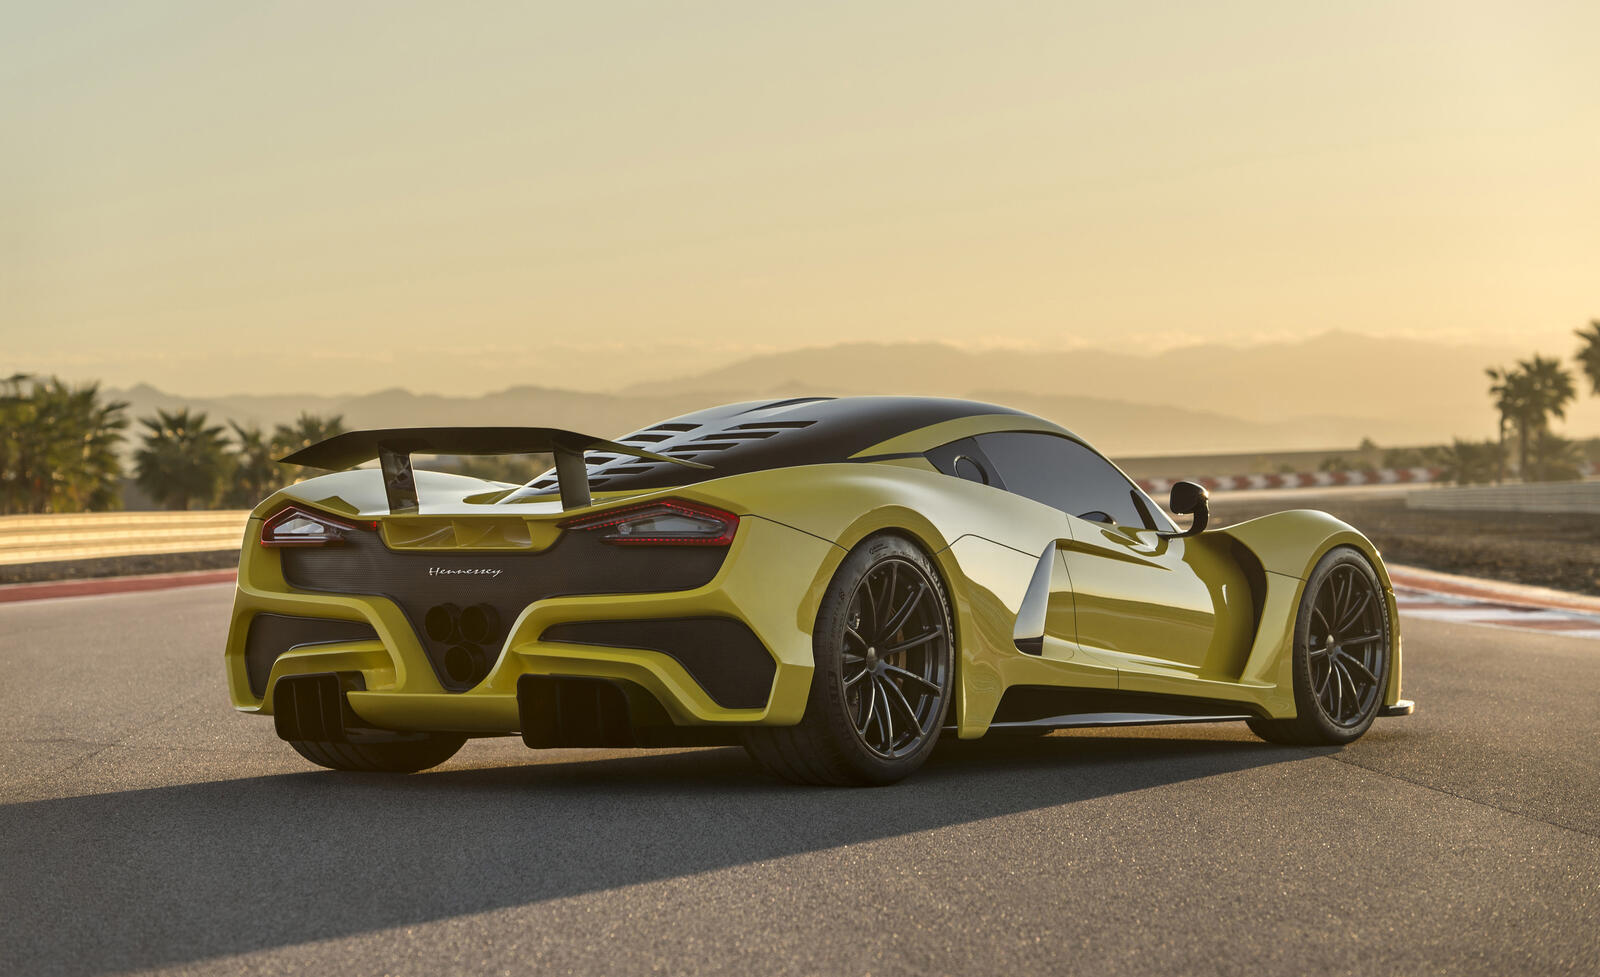 Wallpapers cars yellow Hennessey on the desktop